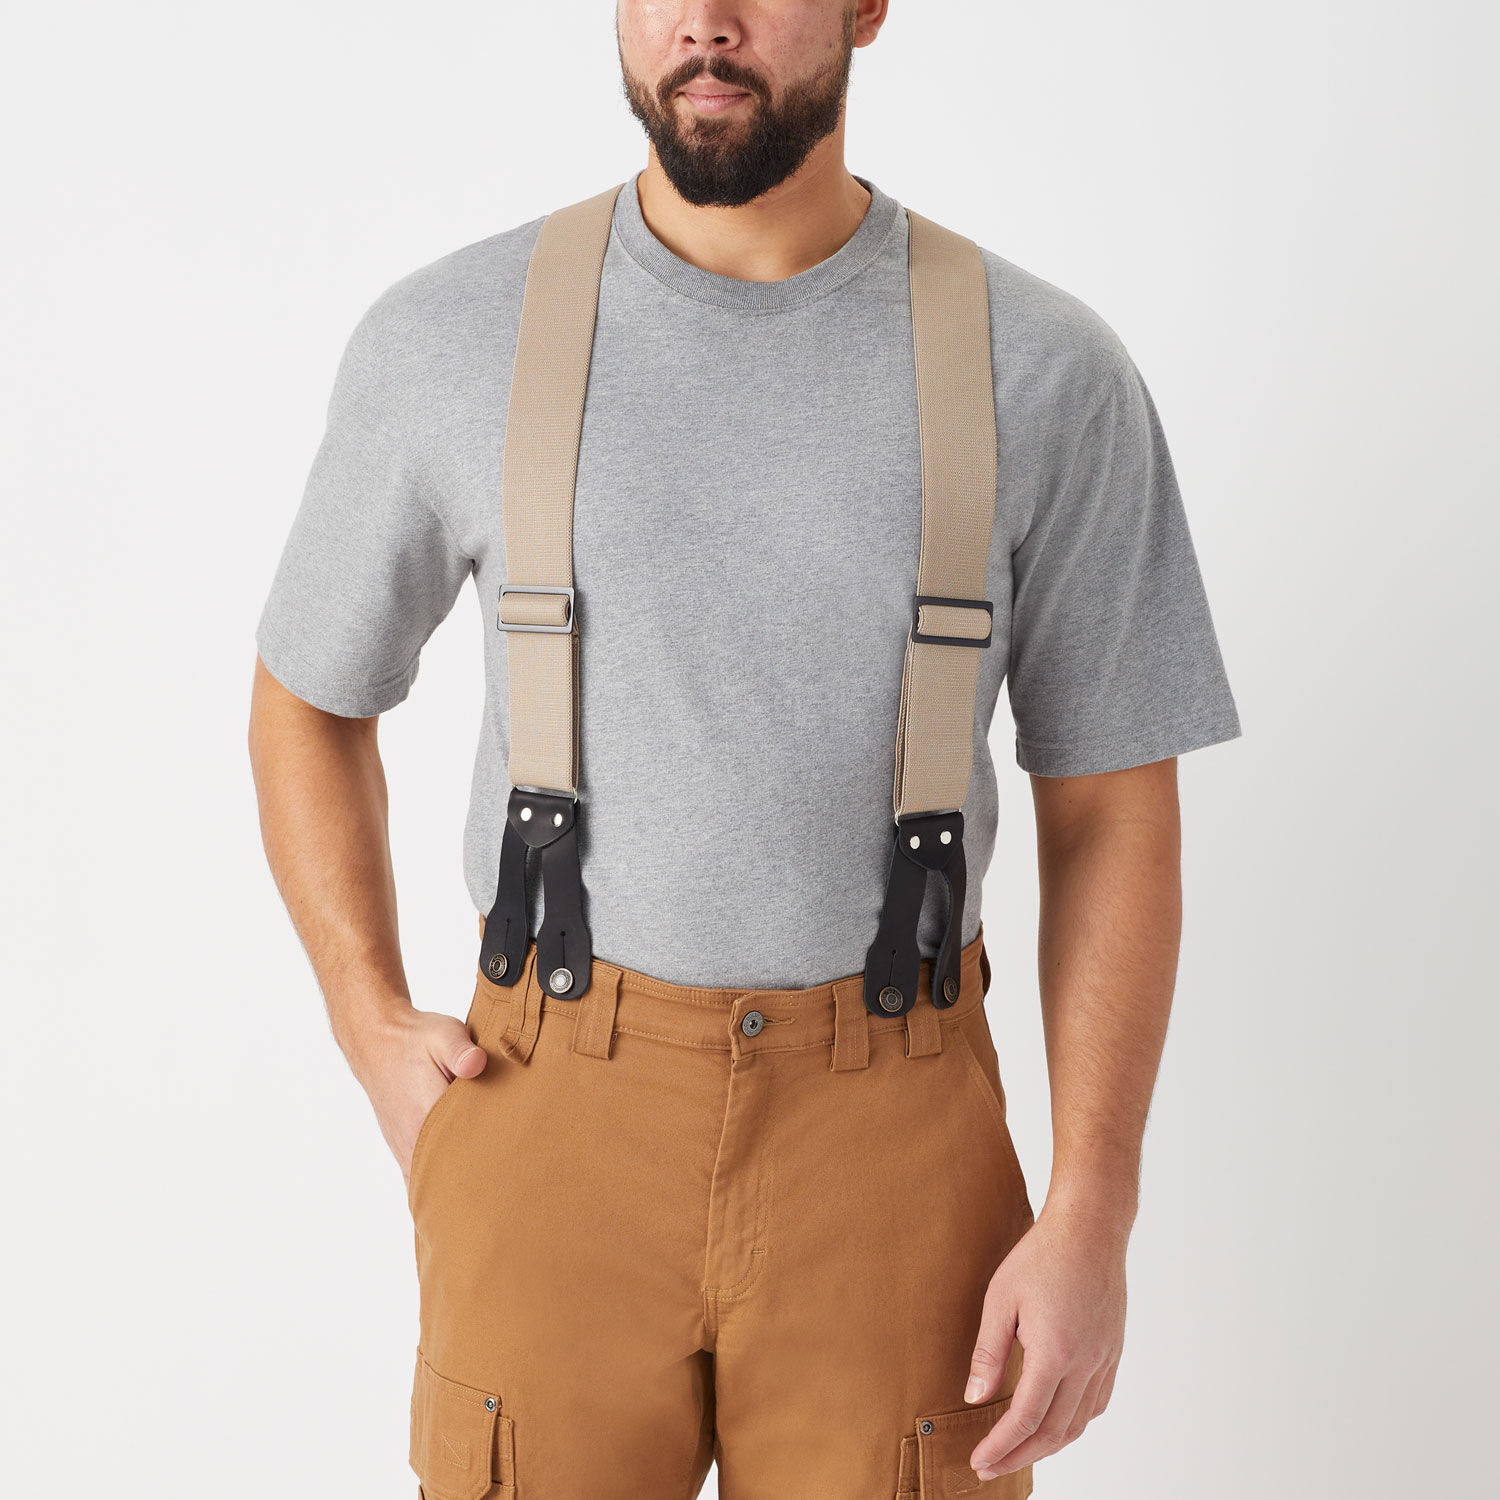 38cm Heavy Duty X Shape Work 1 2 Inch Suspenders For Men With 4 Swivel Snap  Hooks Adjustable Elastic Braces For Bikers, Snowboarding, And More From  Junglegirl, $21.01 | DHgate.Com